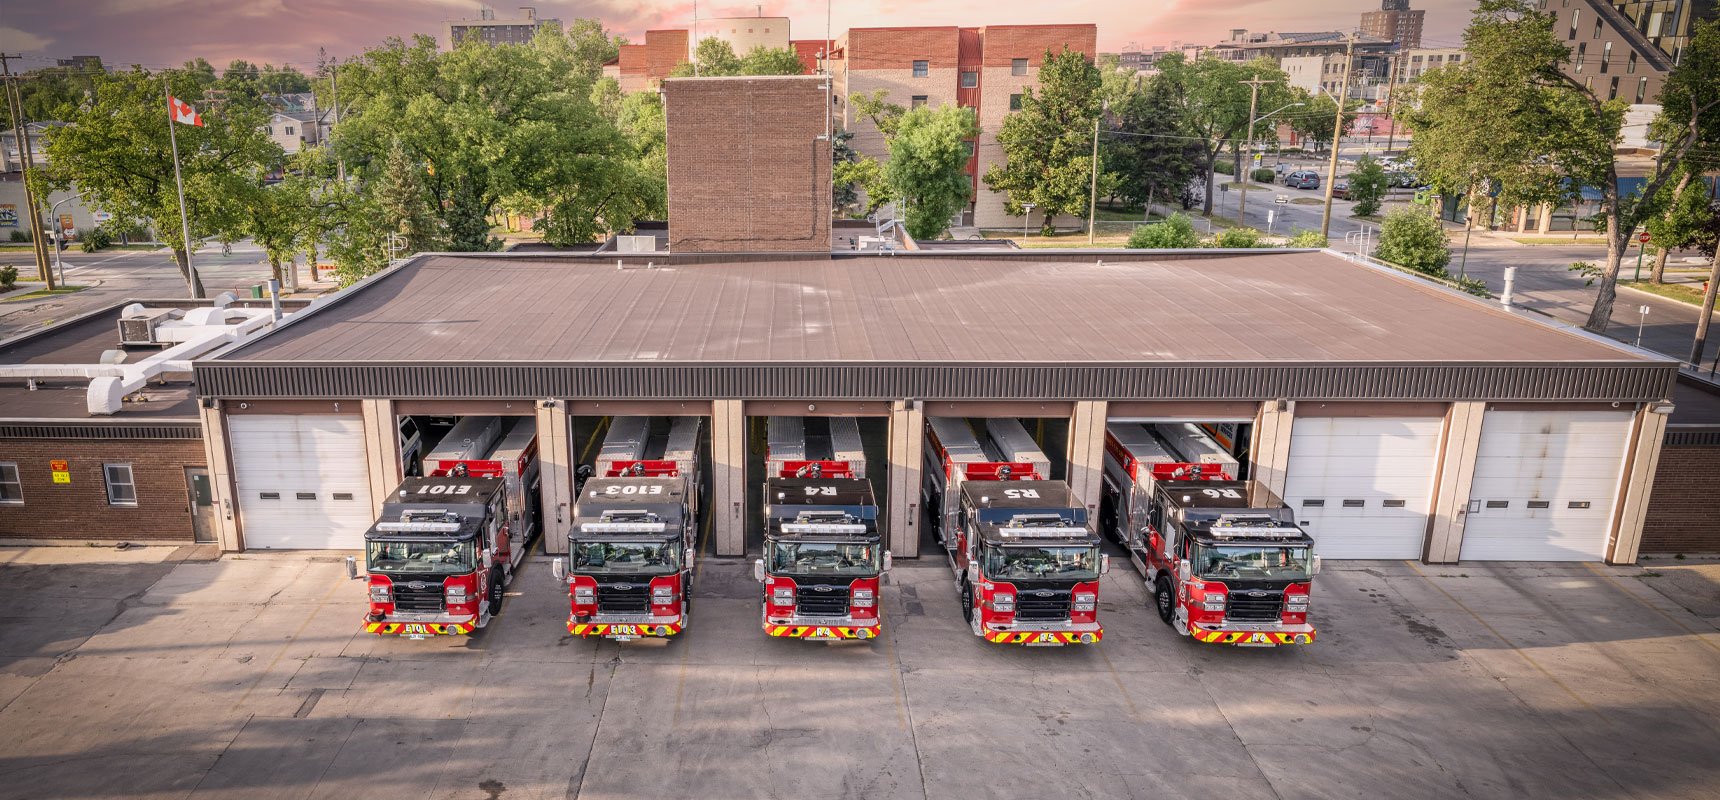 An aerial camera shows five Pierce fire trucks in Canada pulling out of an 8-bay fire station in unison. 